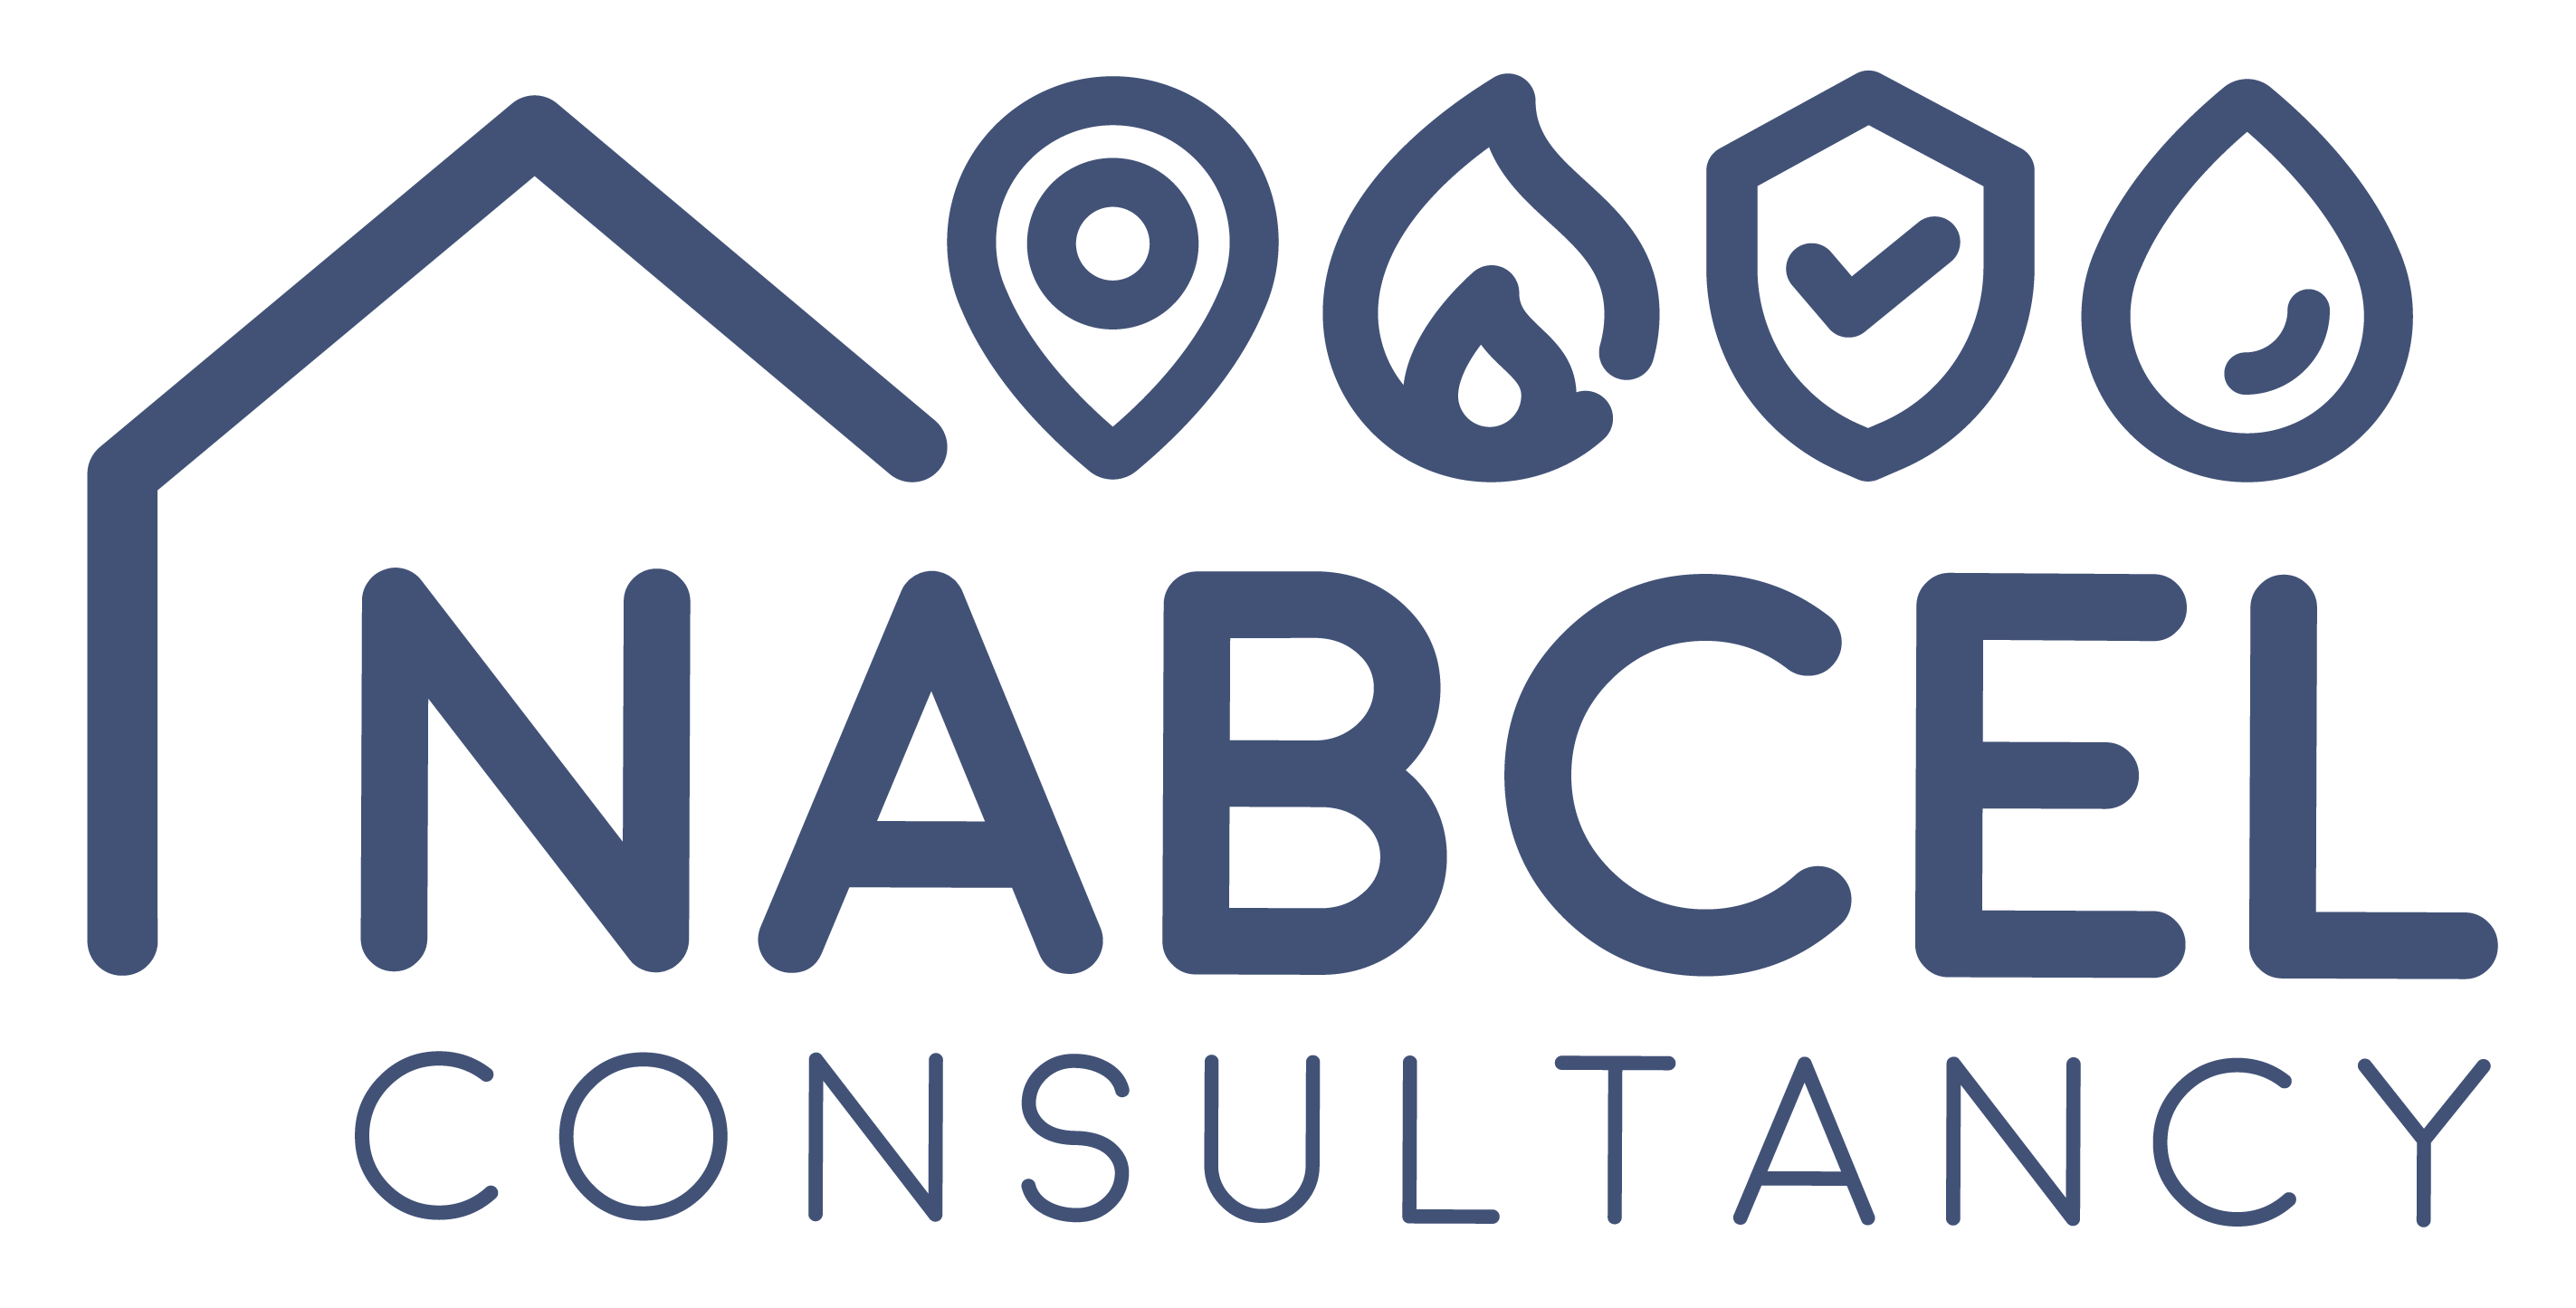 NABCEL Cleaning Logo